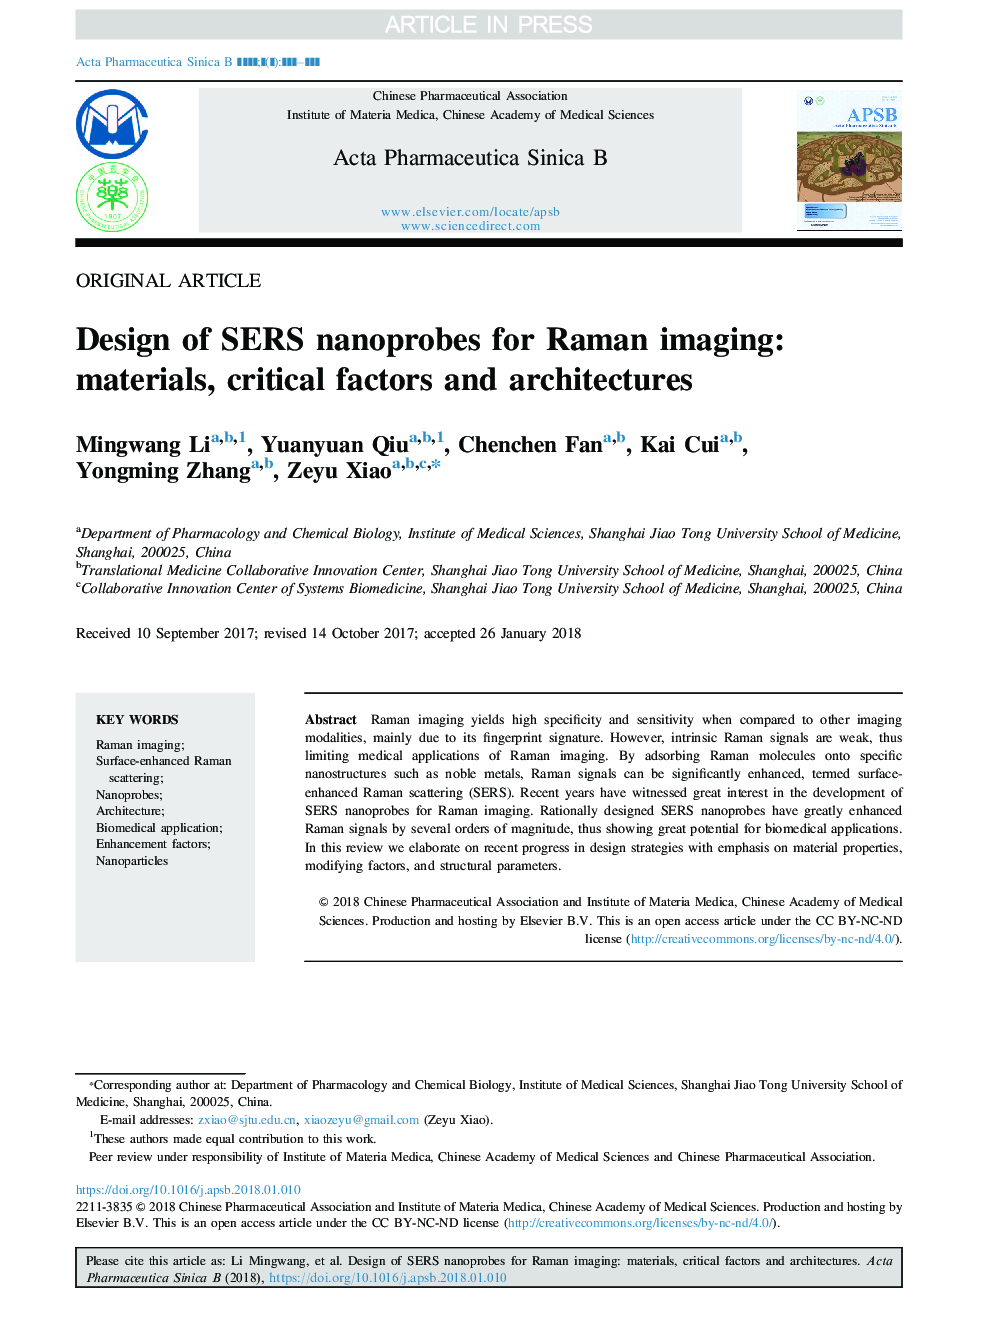 Design of SERS nanoprobes for Raman imaging: materials, critical factors and architectures